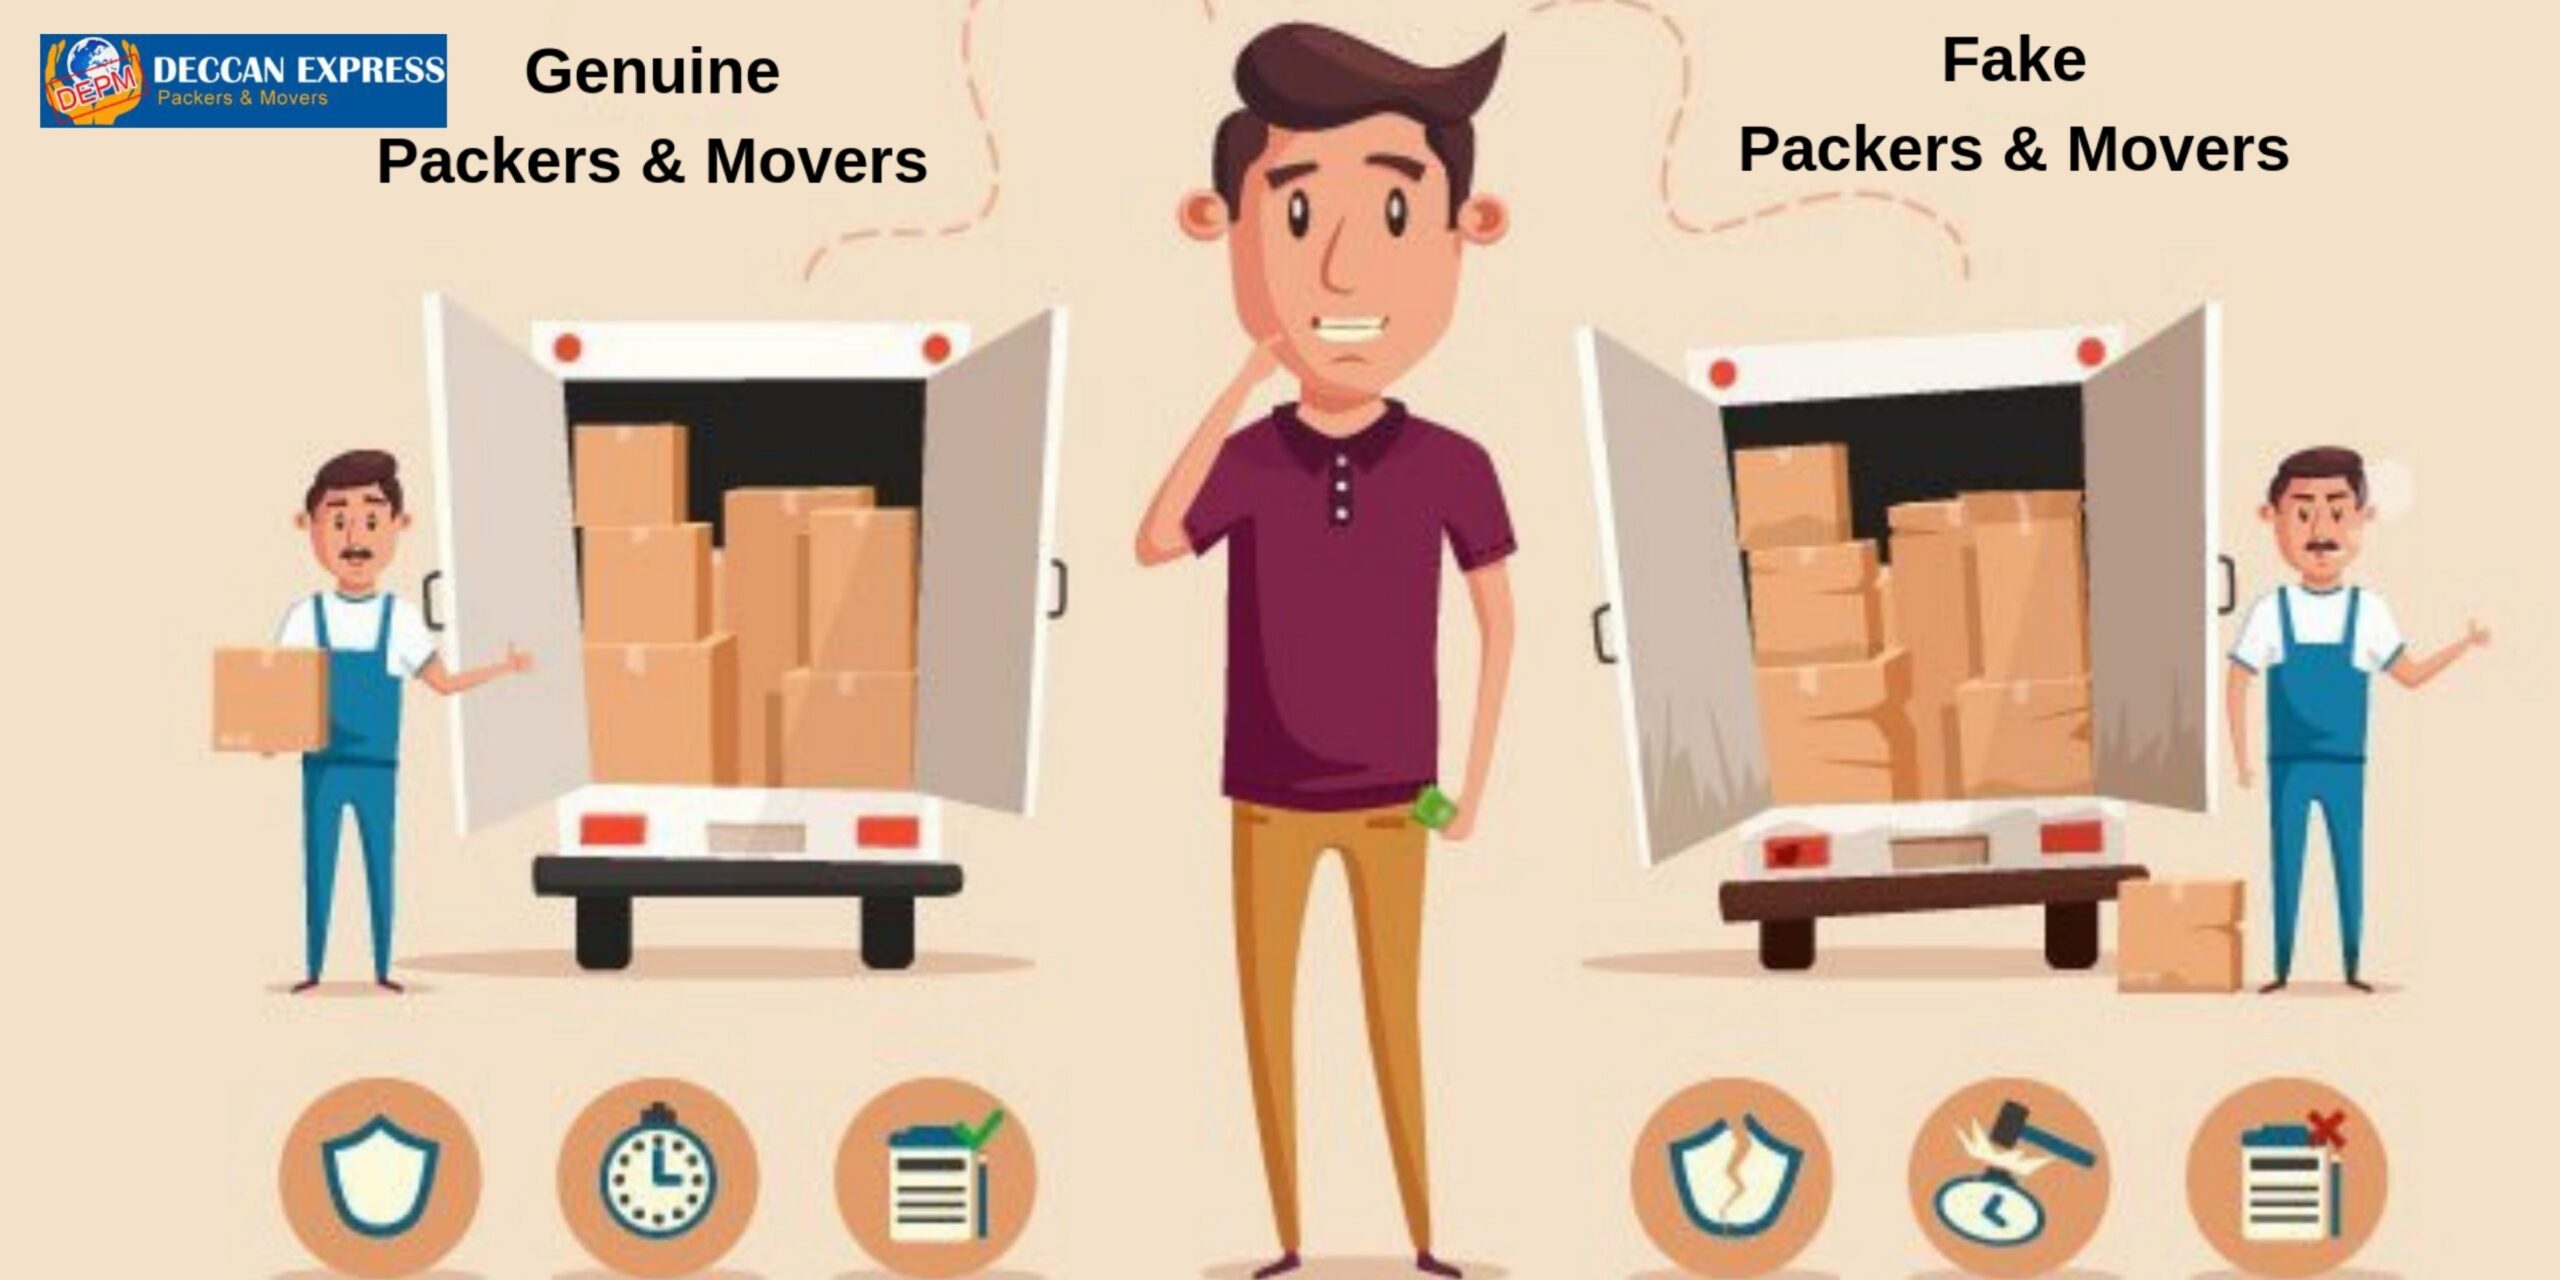 How to know if your packers and movers is genuine or not